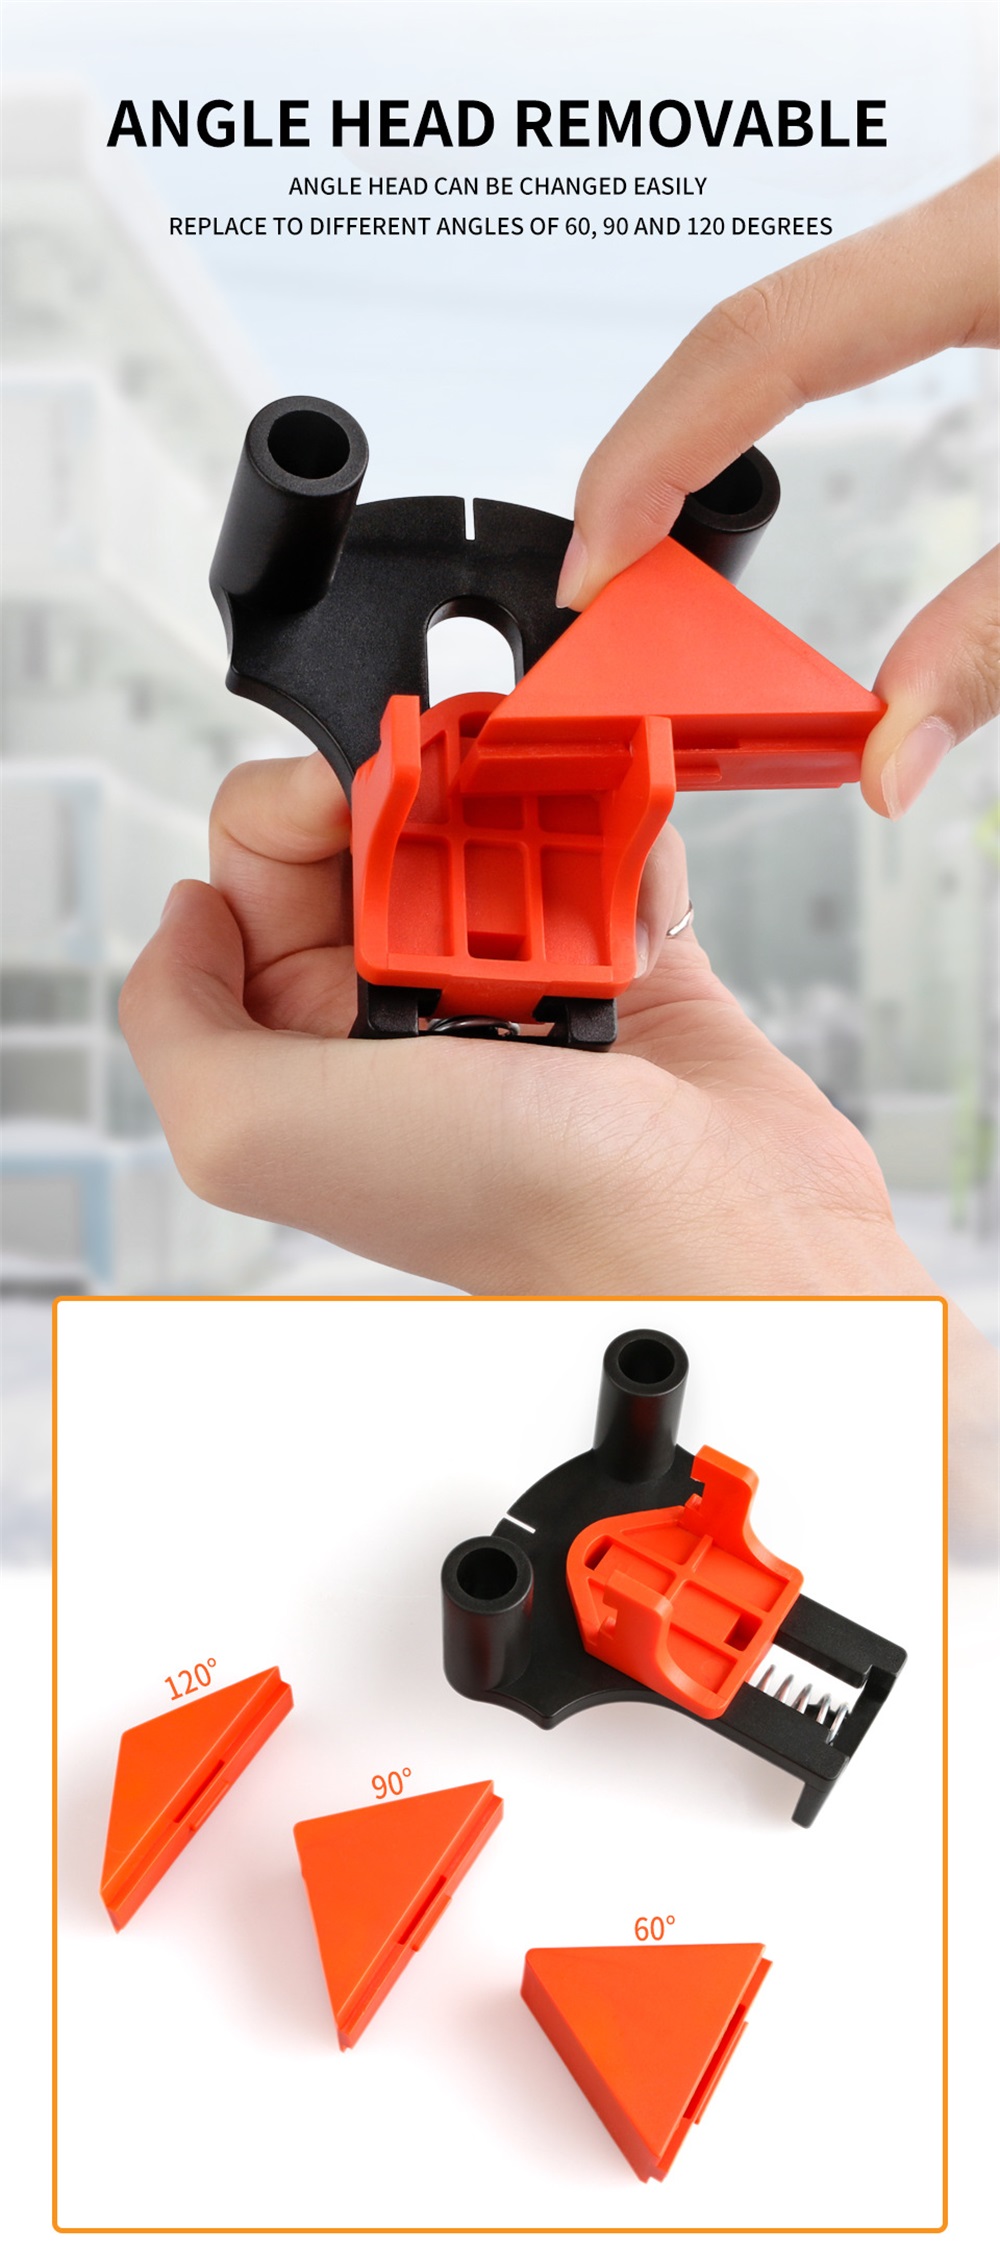 6090120-Degree-Right-Angle-Clamp-Angle-Mate-Woodworking-Hand-Fixing-Clips-Picture-Frame-Corner-Clip--1848026-6